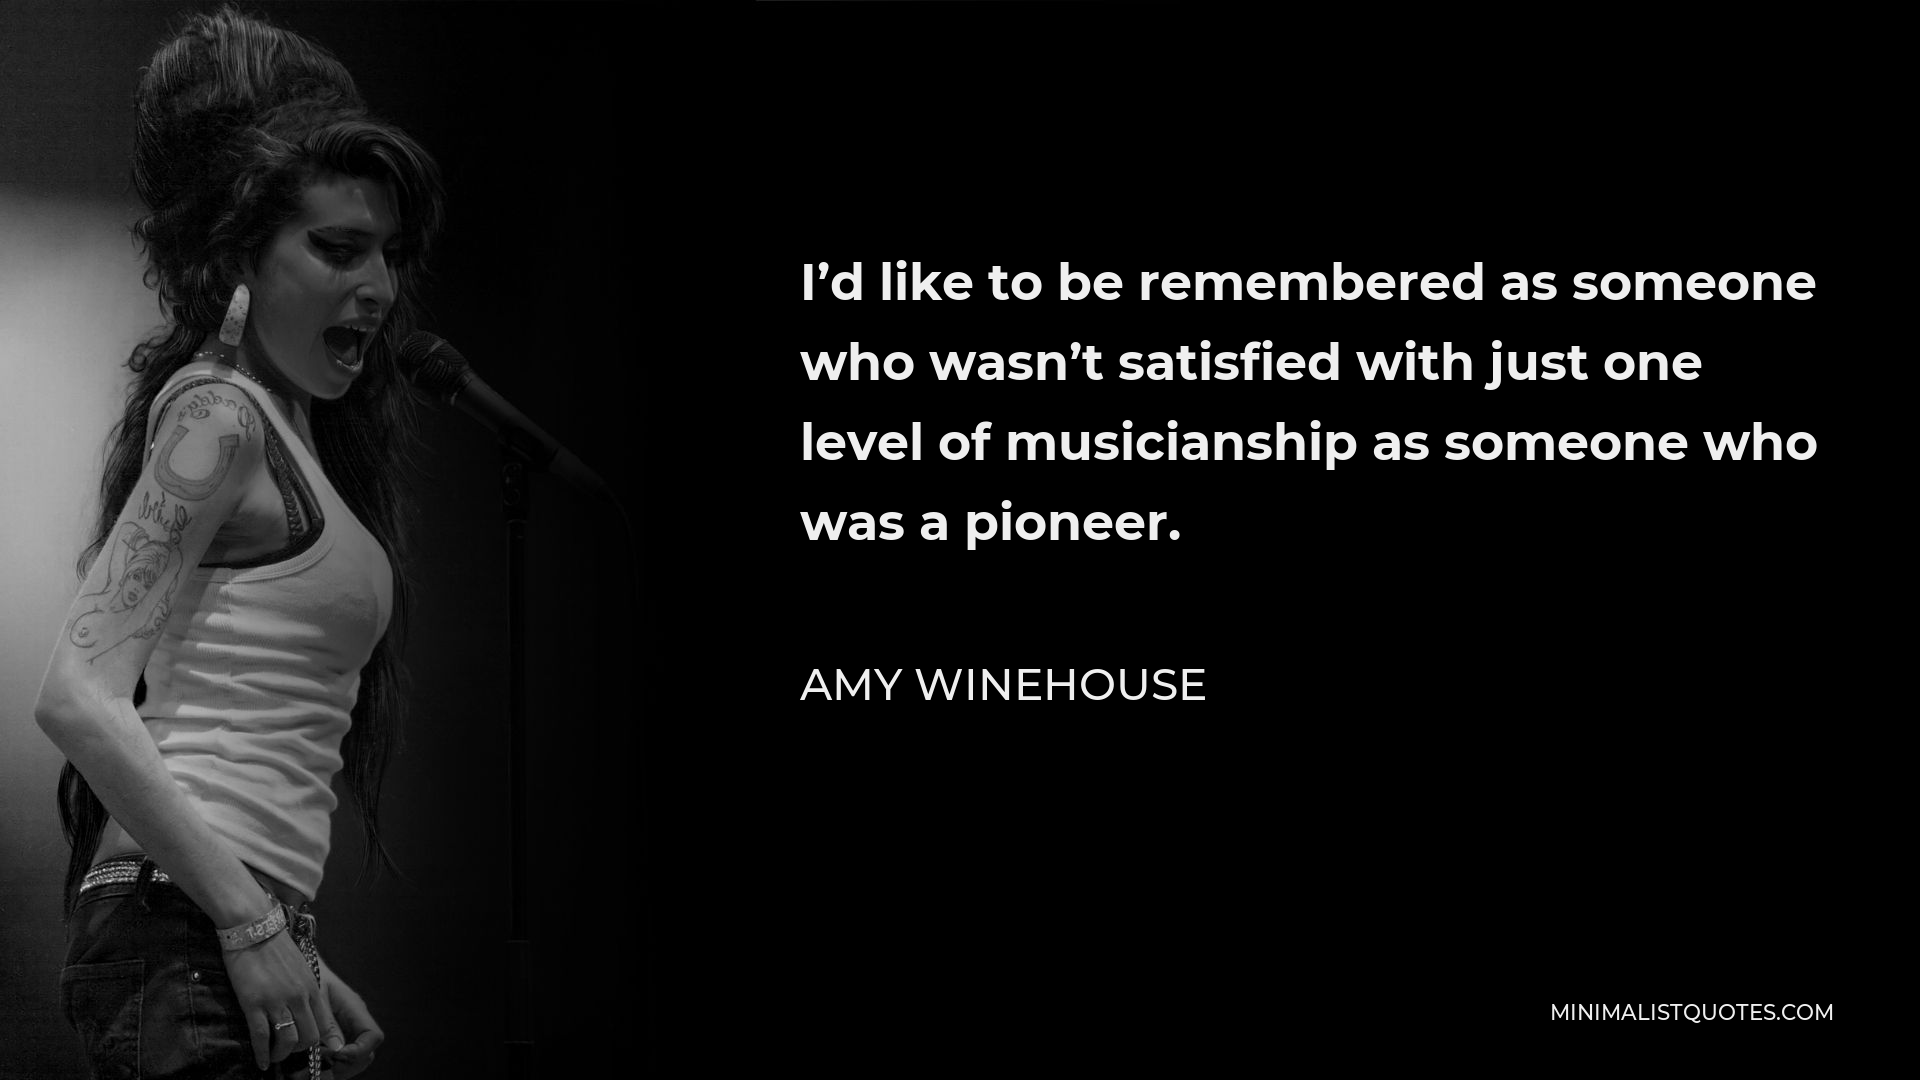 Amy Winehouse Quote - I’d like to be remembered as someone who wasn’t satisfied with just one level of musicianship as someone who was a pioneer.